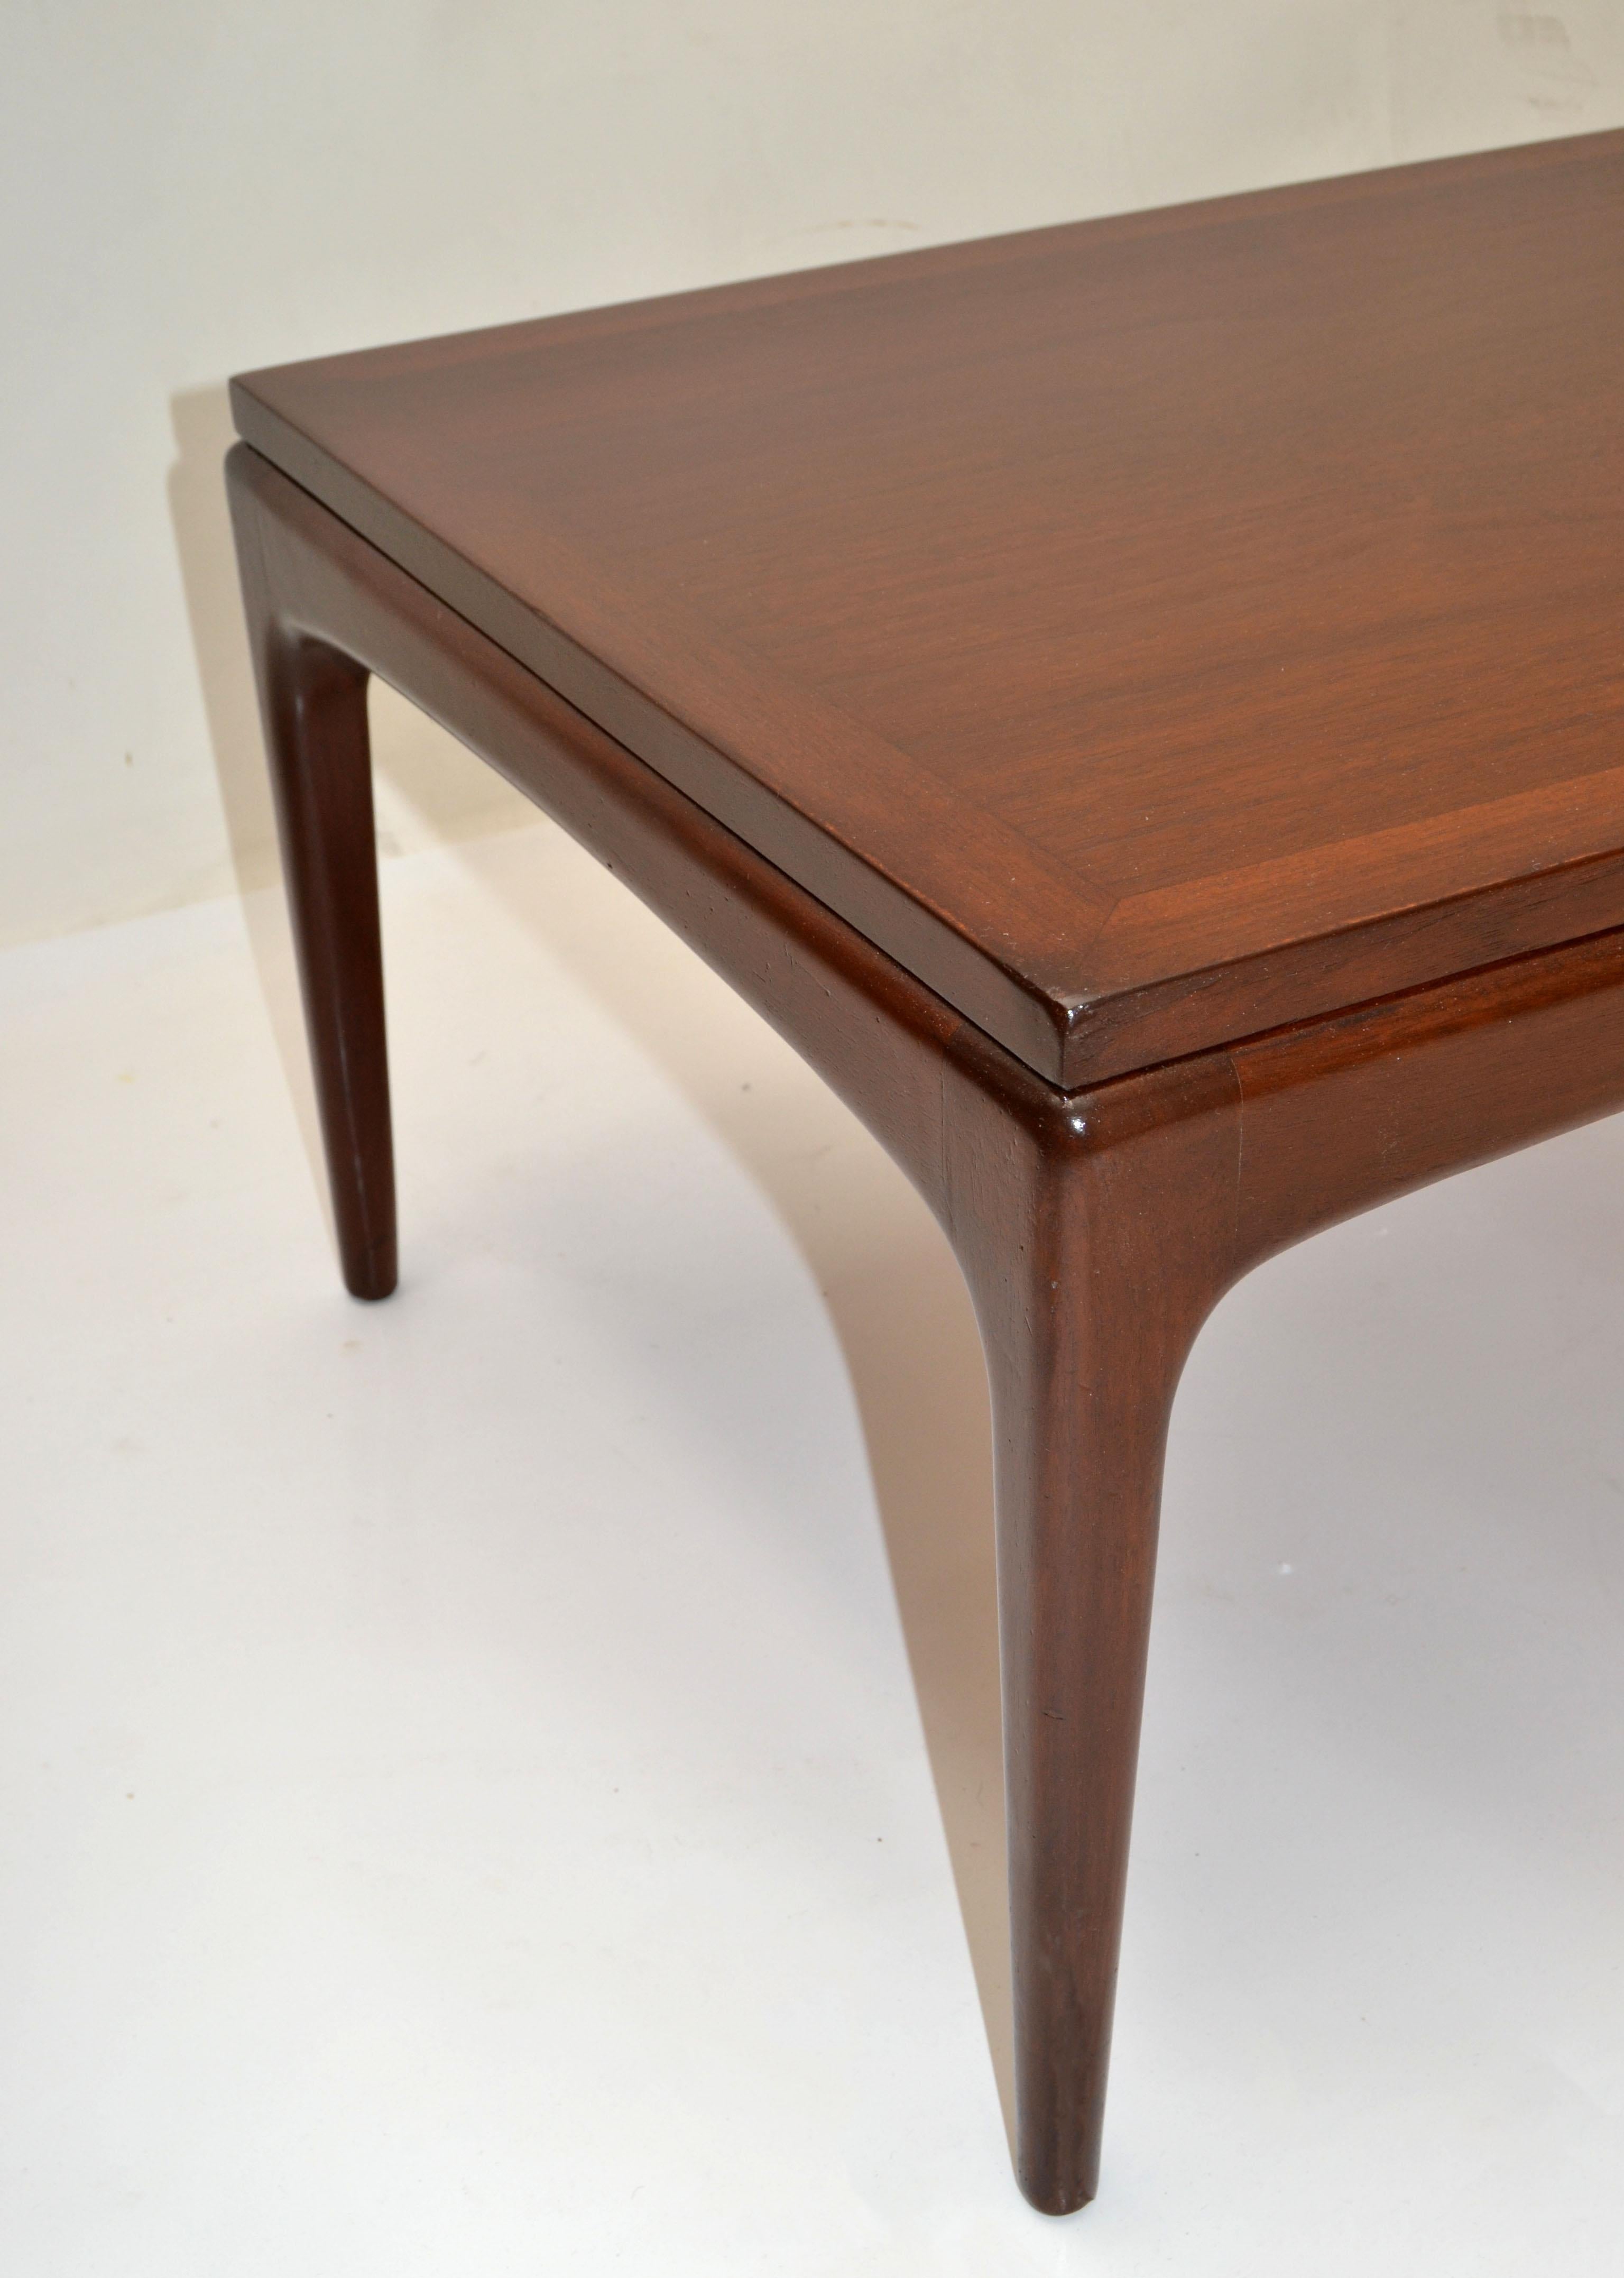 Gio Ponti Style Low Coffee Table Tapered Legs Walnut Mid-Century Modern Italy 70 For Sale 5